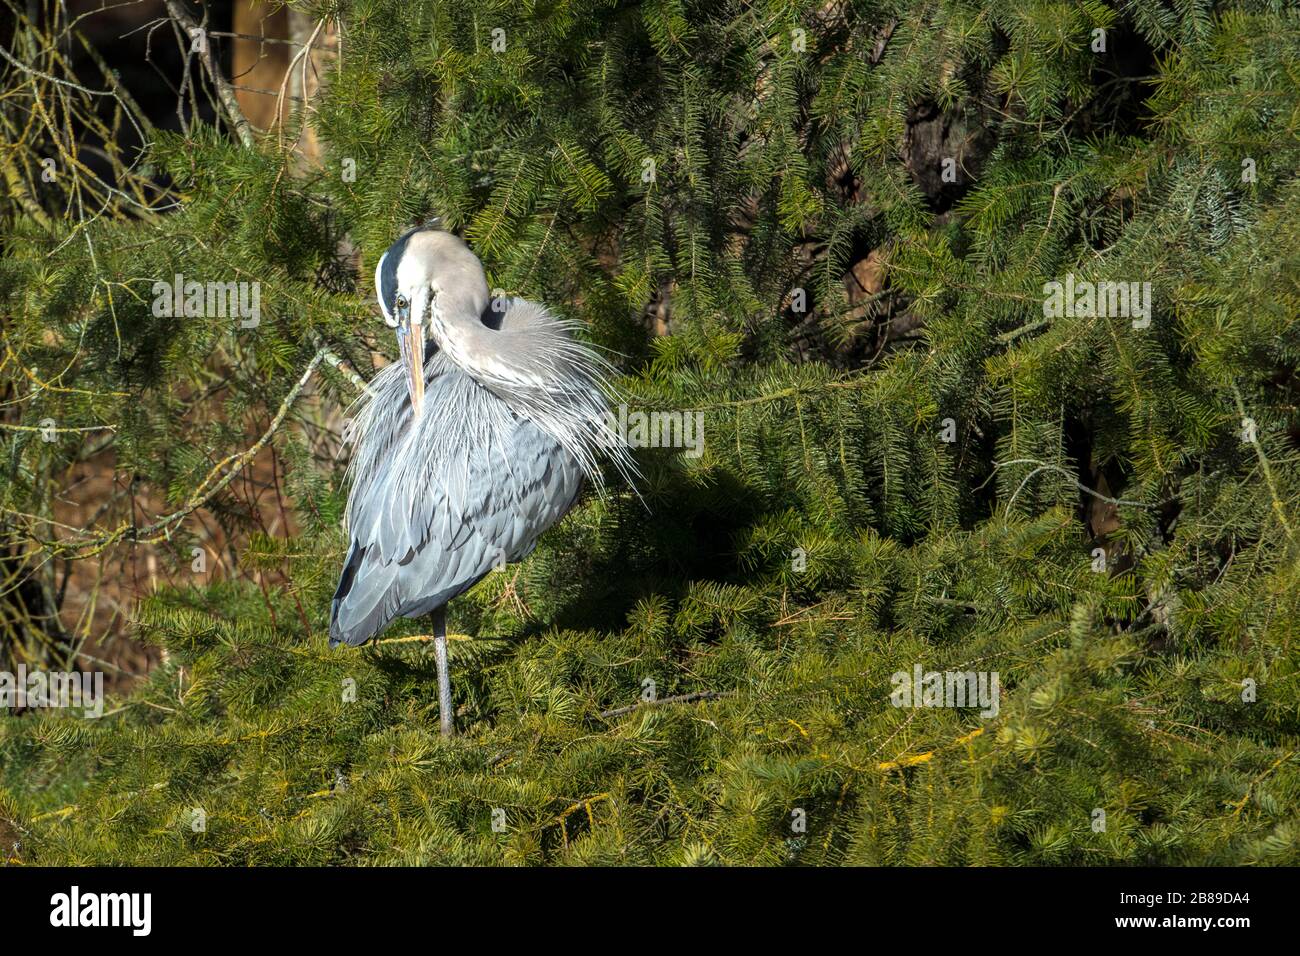 A great blue heron preens itself while standing on a cluster of pine boughs in north Idaho.. Stock Photo